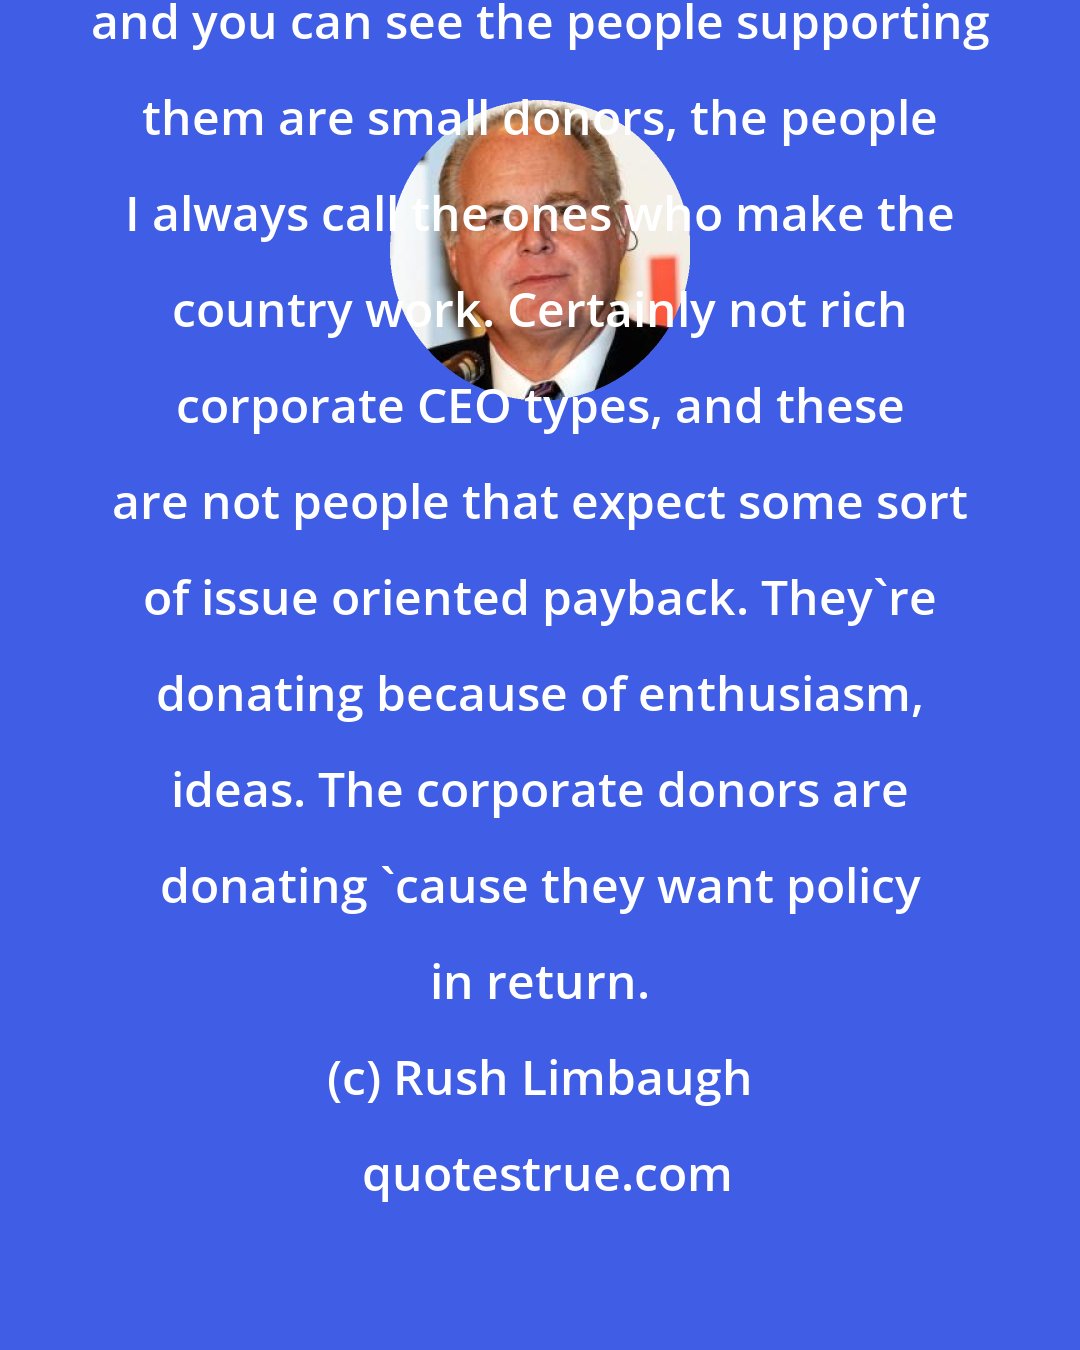 Rush Limbaugh: You look at Donald Trump and Ben Carson and you can see the people supporting them are small donors, the people I always call the ones who make the country work. Certainly not rich corporate CEO types, and these are not people that expect some sort of issue oriented payback. They're donating because of enthusiasm, ideas. The corporate donors are donating 'cause they want policy in return.